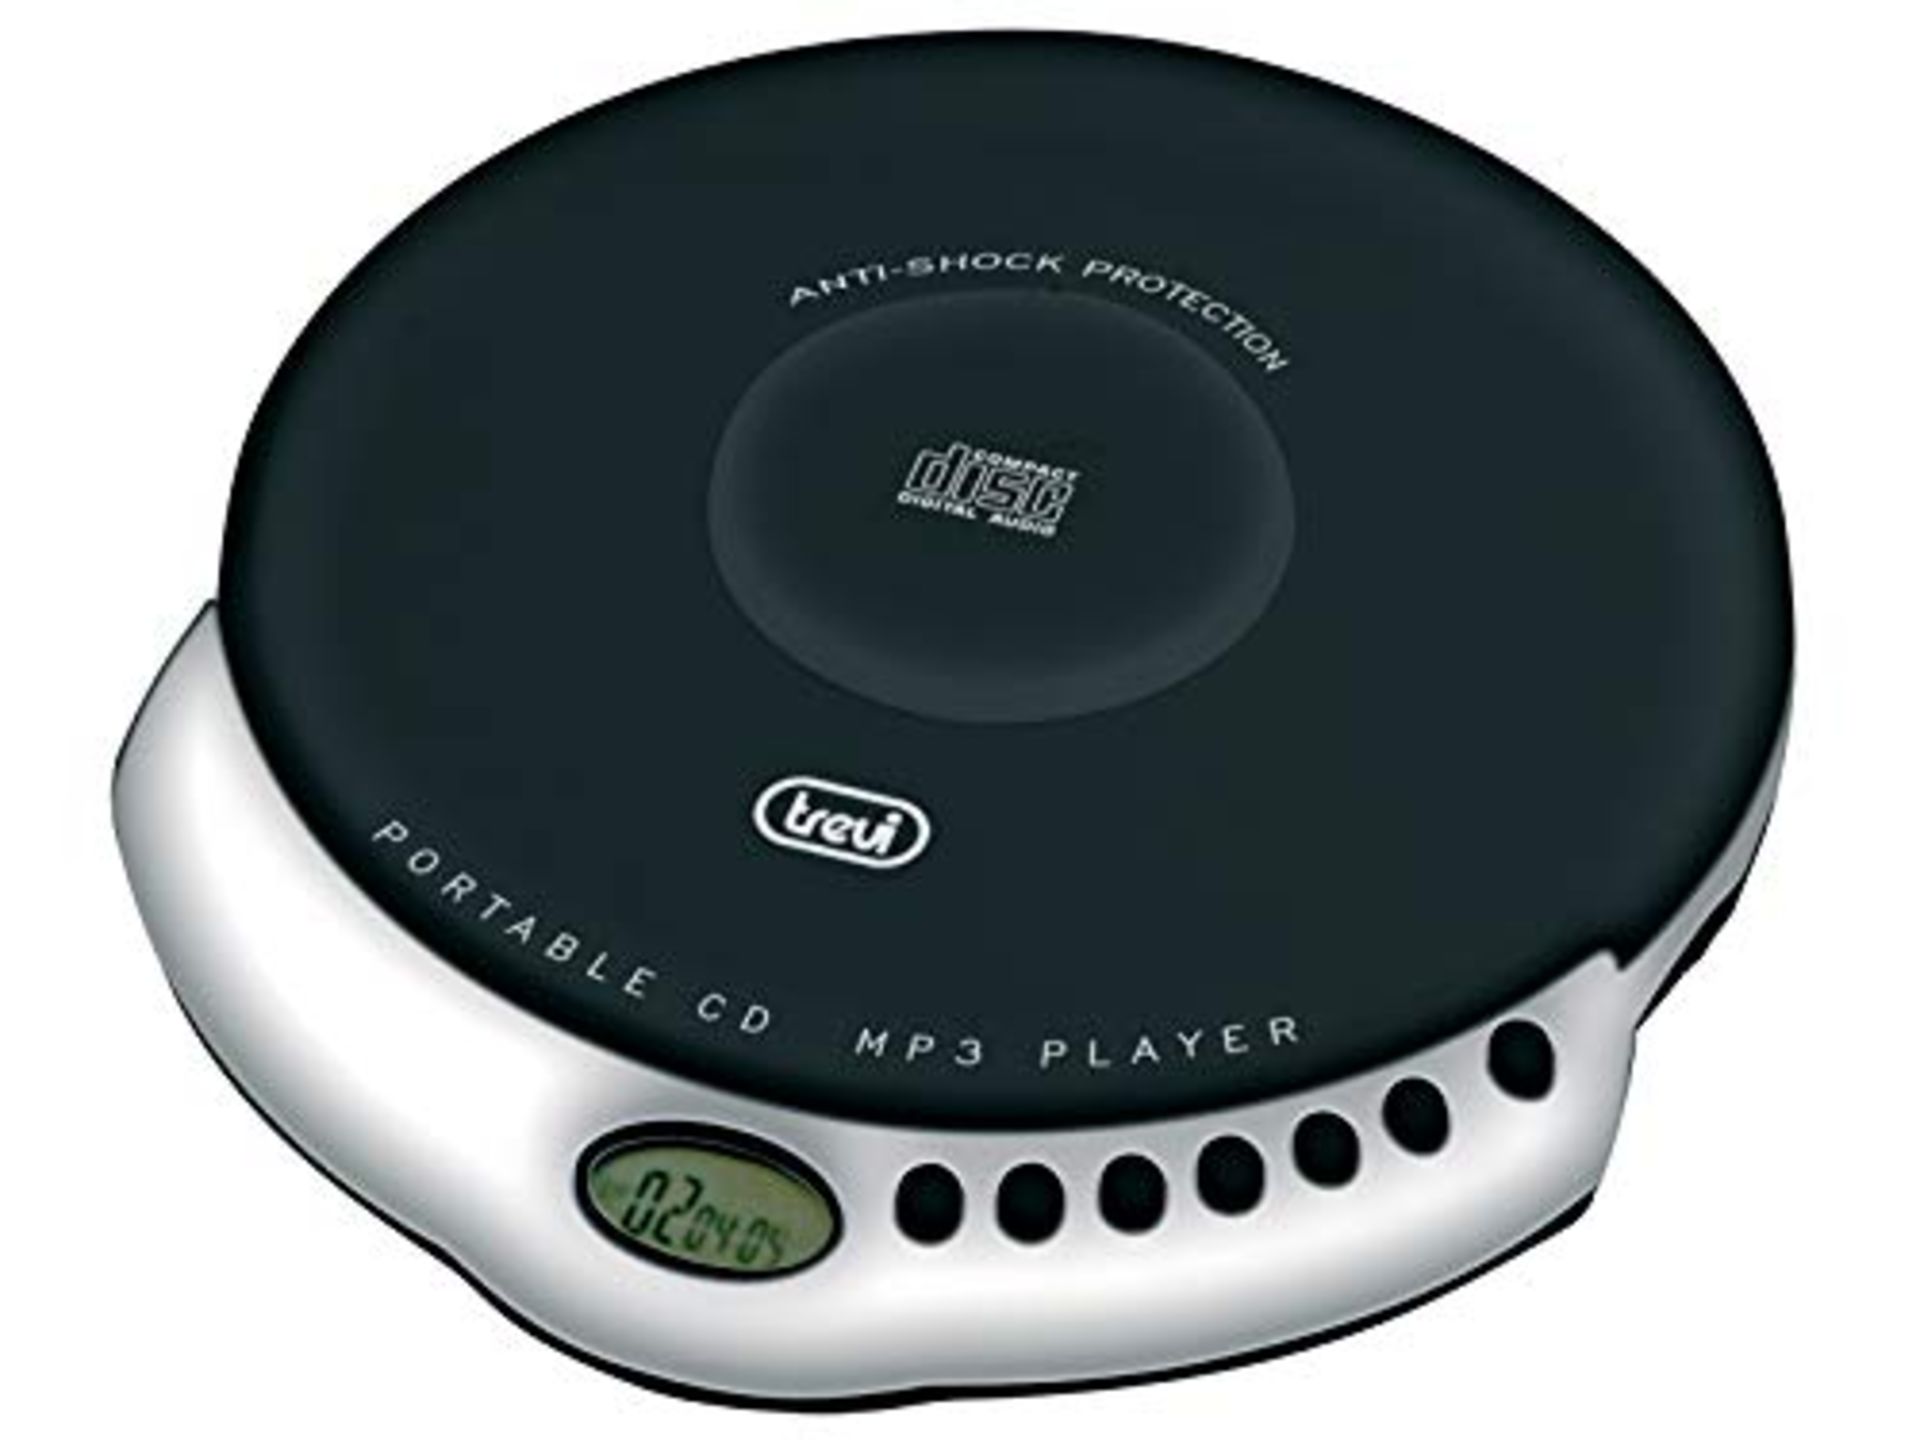 Trevi - Portable CD Player - Image 4 of 6